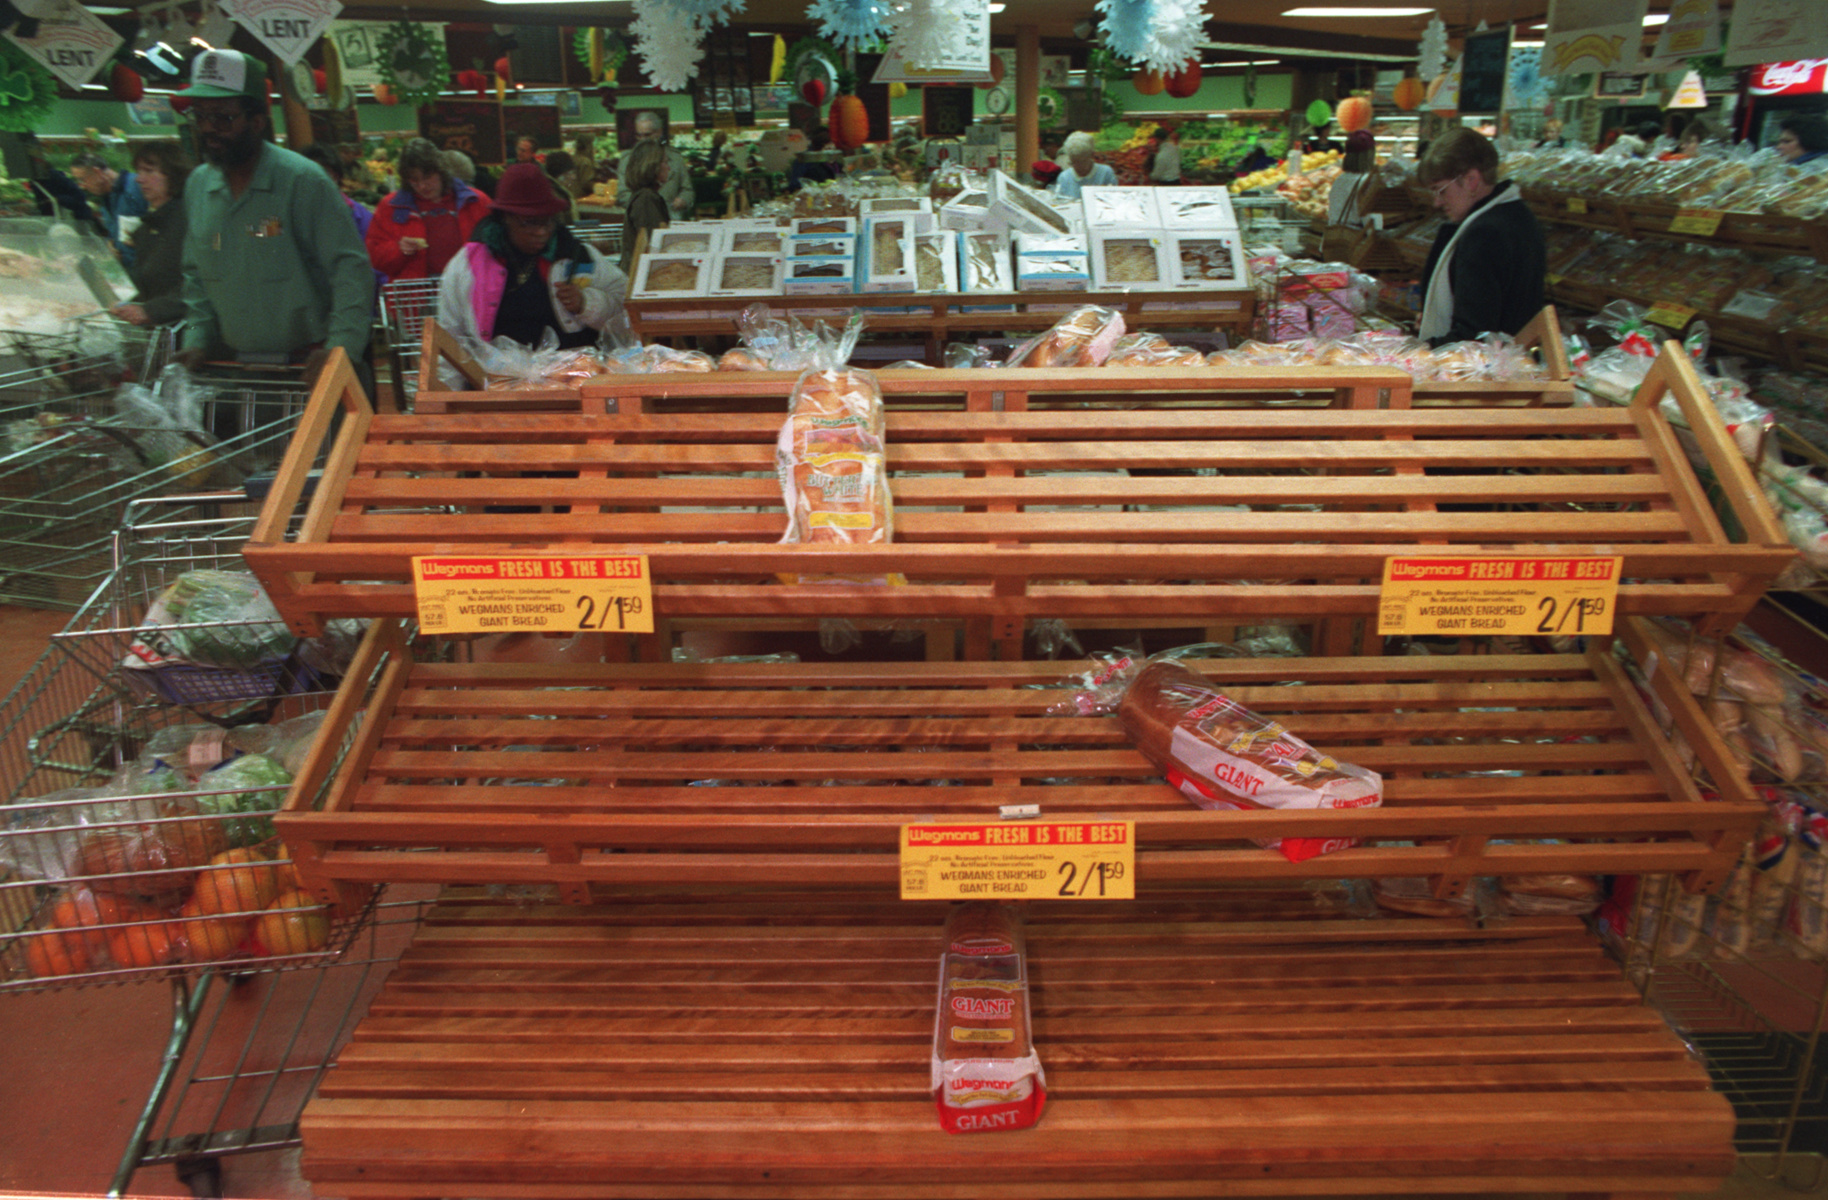 An empty bread rack in the bakery department at the DeWitt Wegmans on at 5 p.m. on March 11, 1993. People jammed the store, stocking up on food in the wake of the approaching "Storm of the Century."